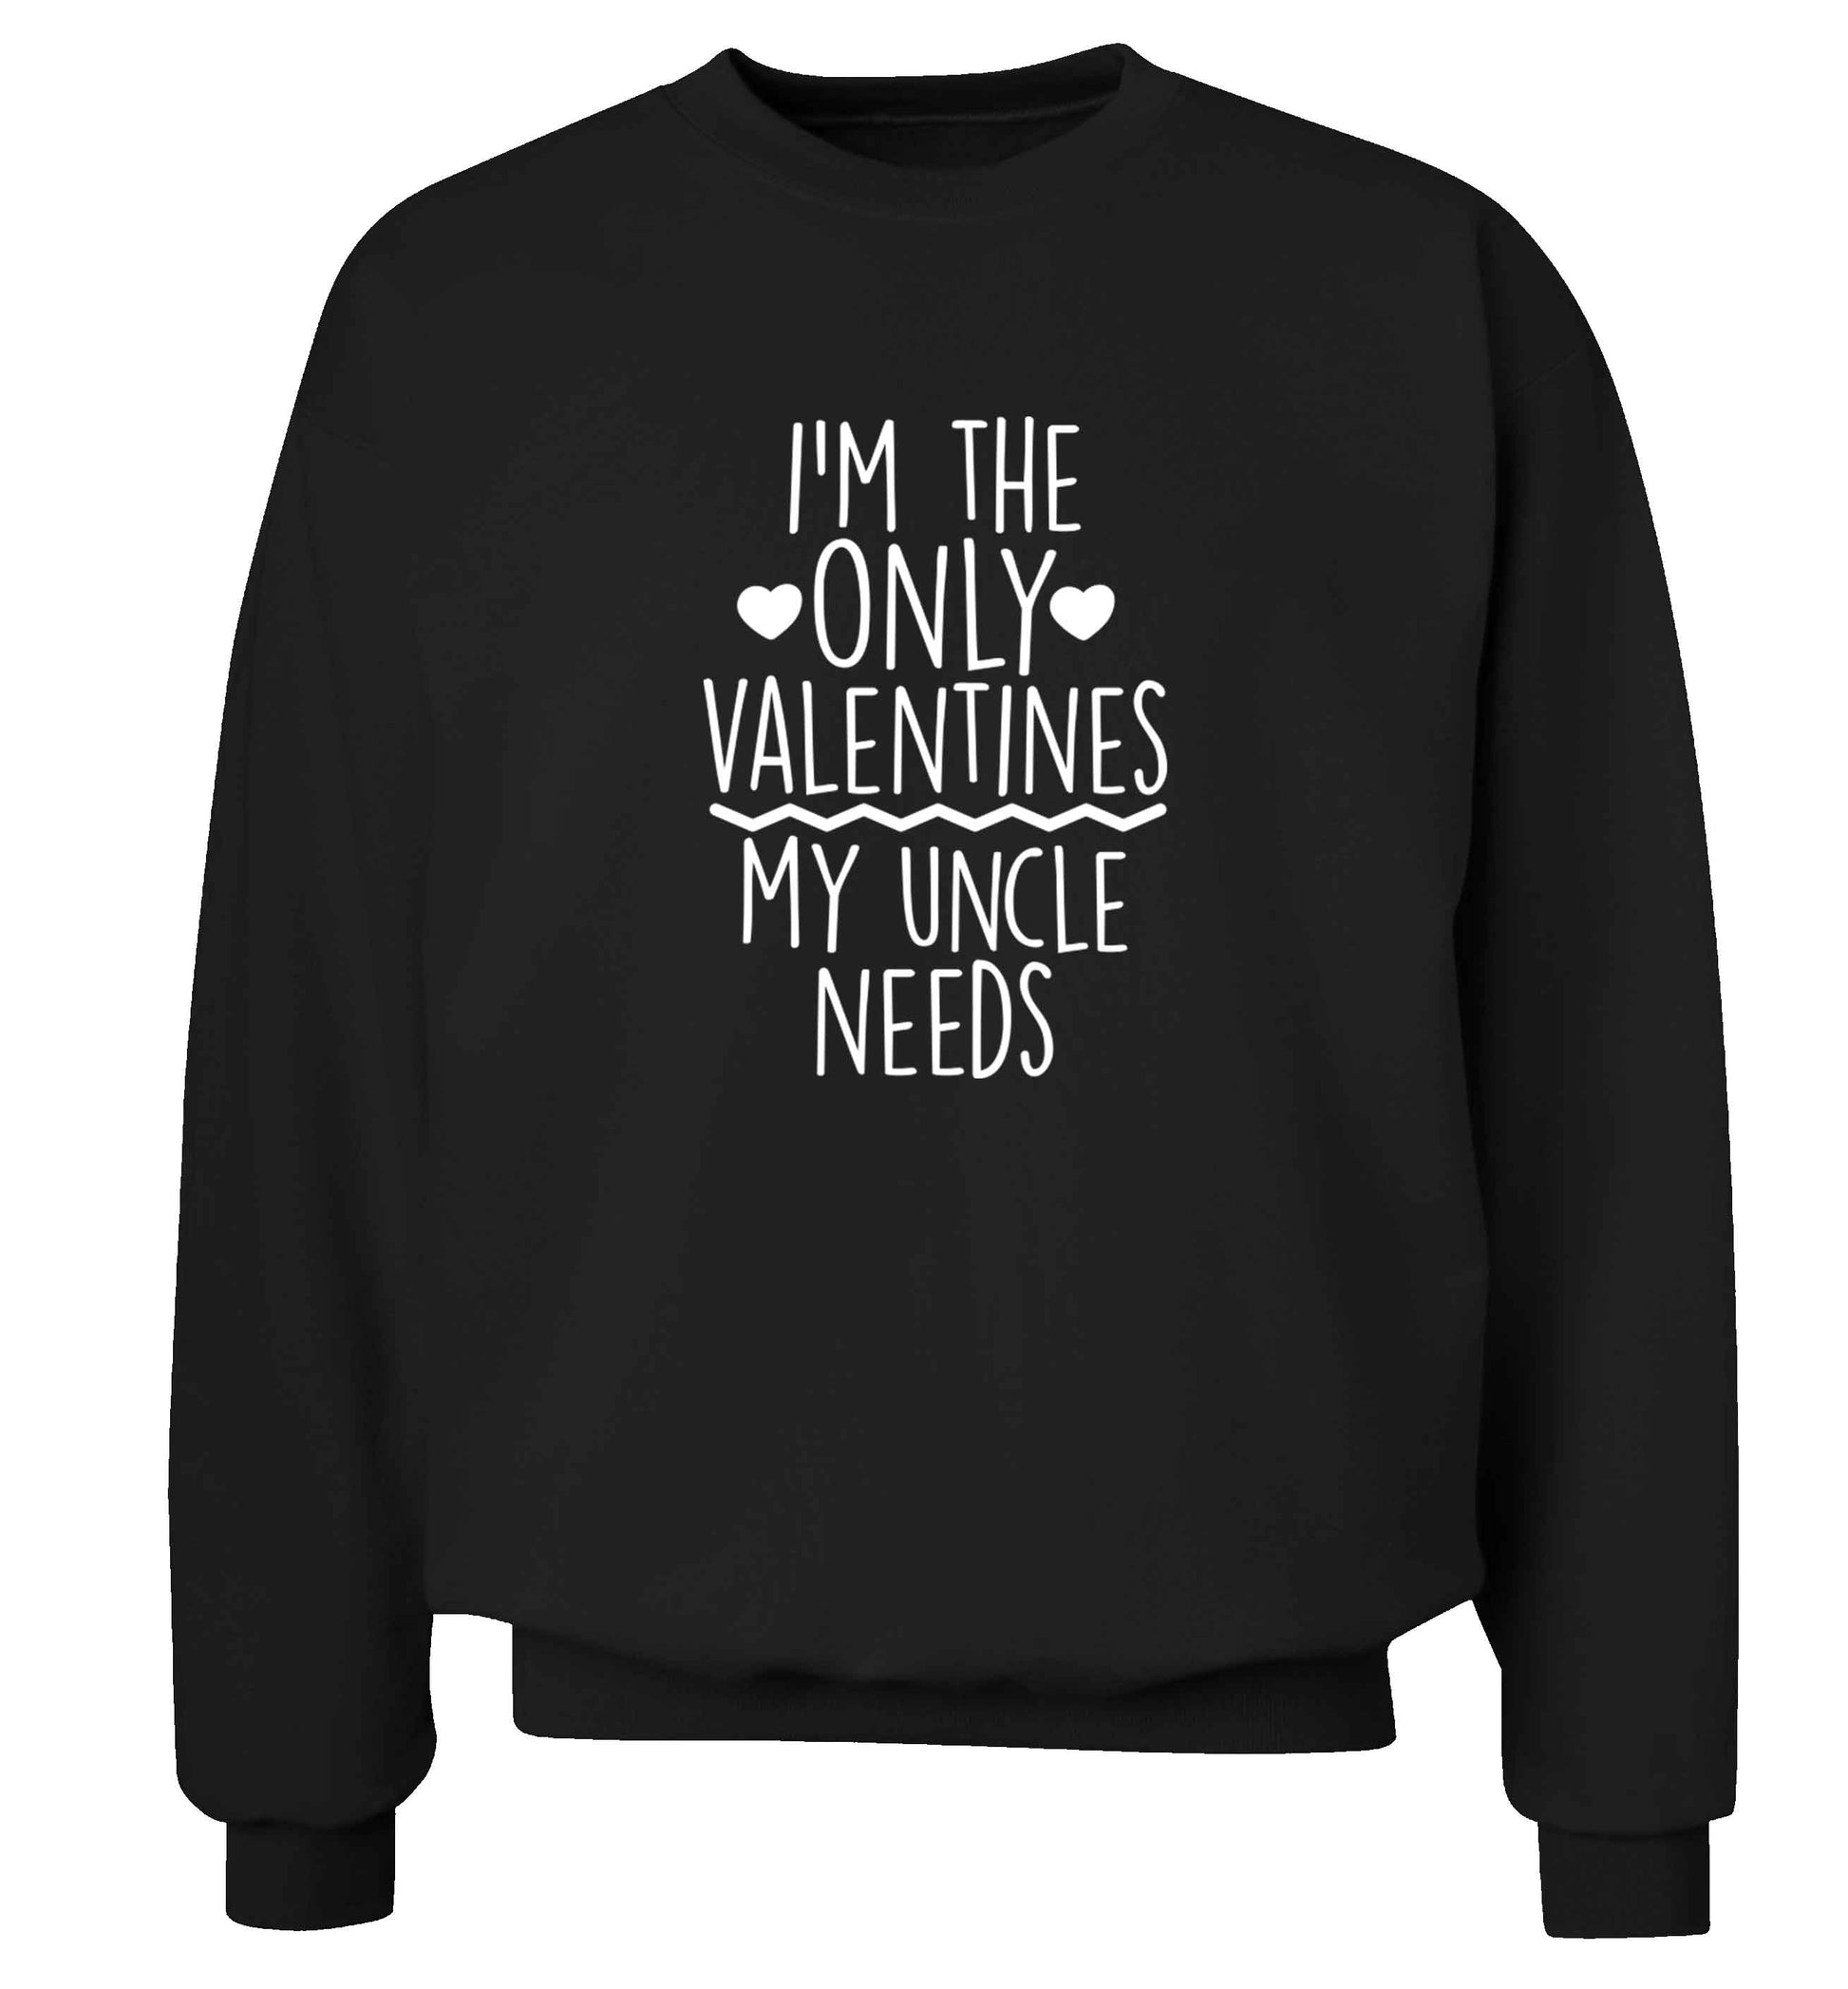 I'm the only valentines my uncle needs adult's unisex black sweater 2XL